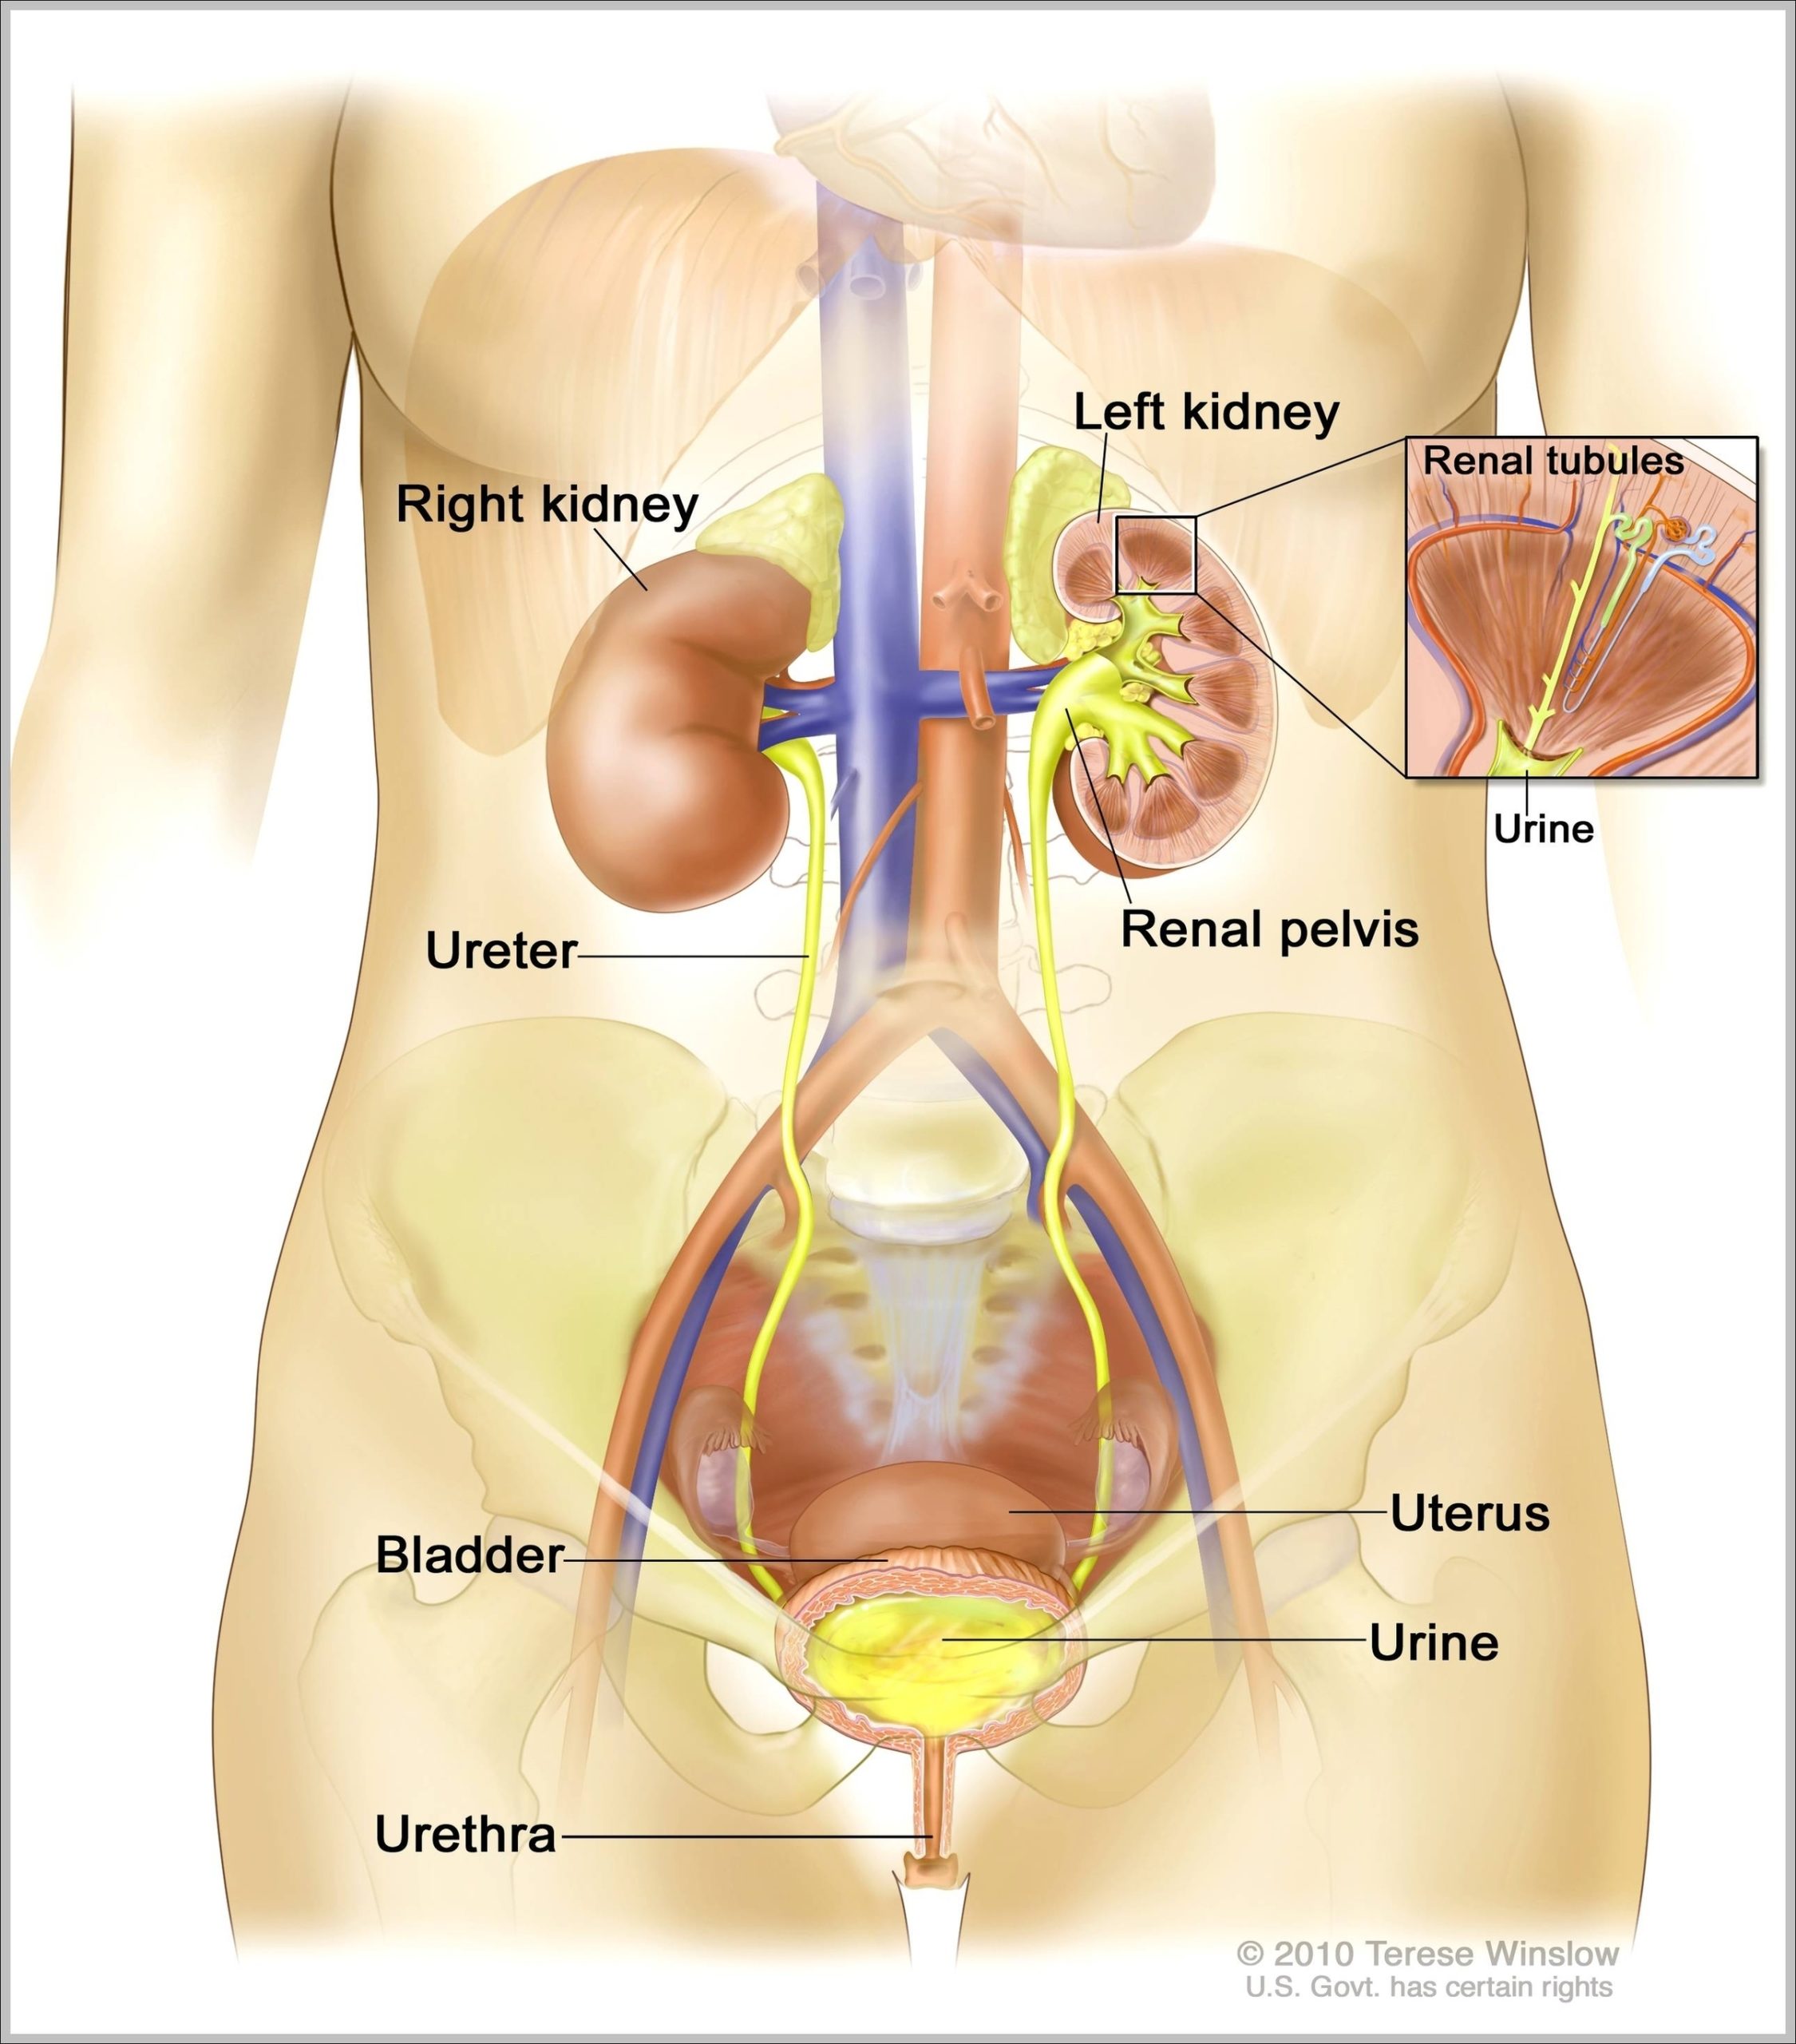 Picture Of Female Reproductive System Diagram Image scaled